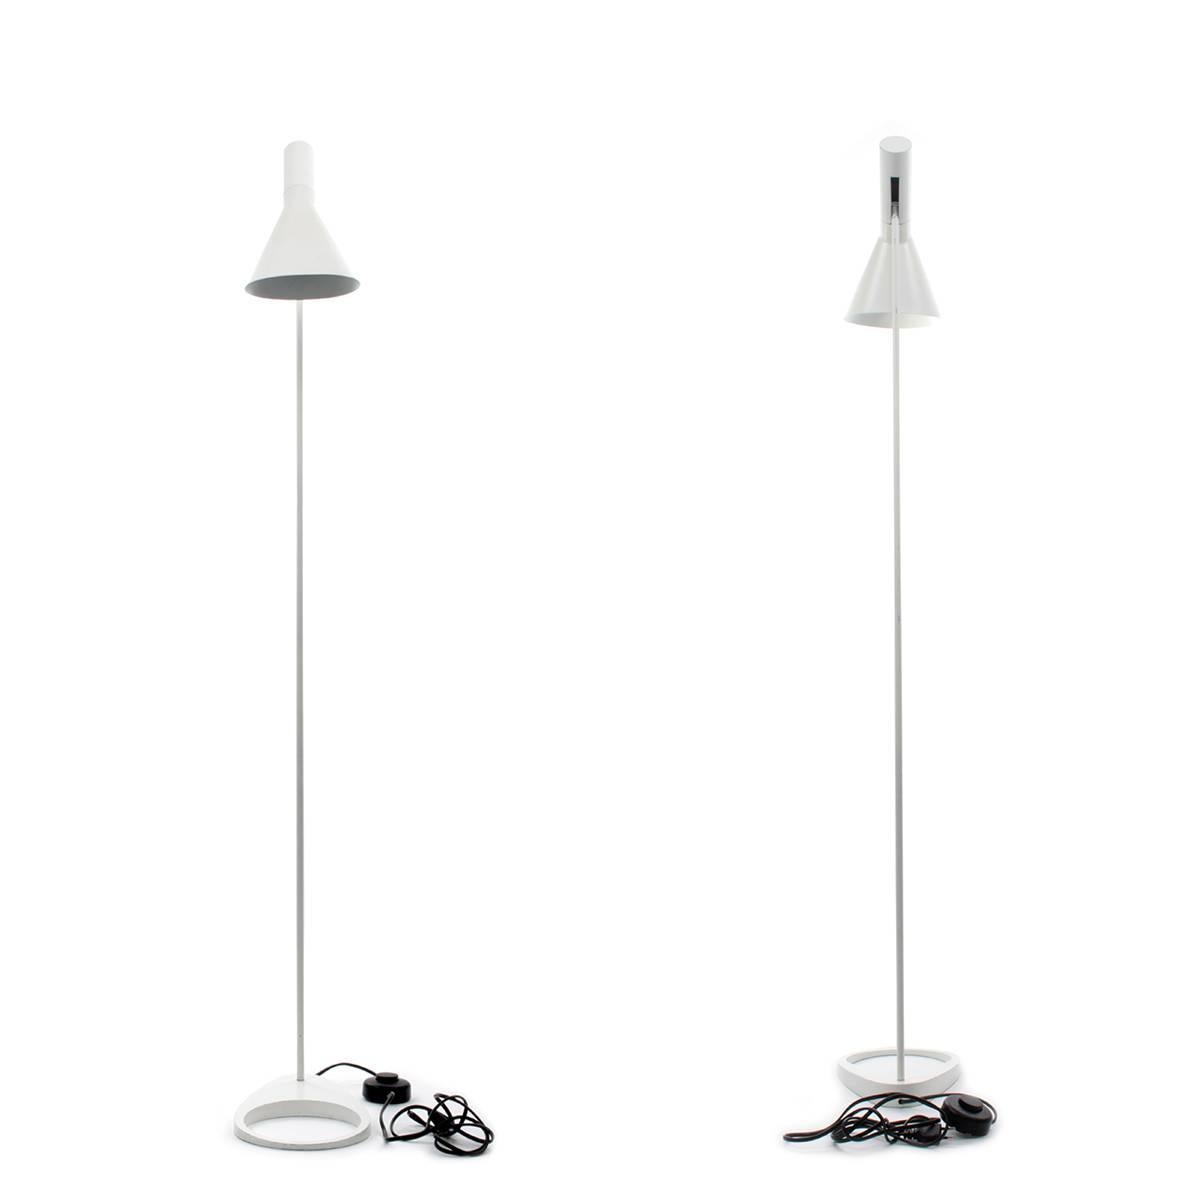 AJ floor lamp, classic floor lamp designed by the world renowned Arne Jacobsen in 1957, produced for Louis Poulsen - and this vintage edition is in very good vintage condition! Iconic Danish lighting design!

Timeless floor lamp with its sleek